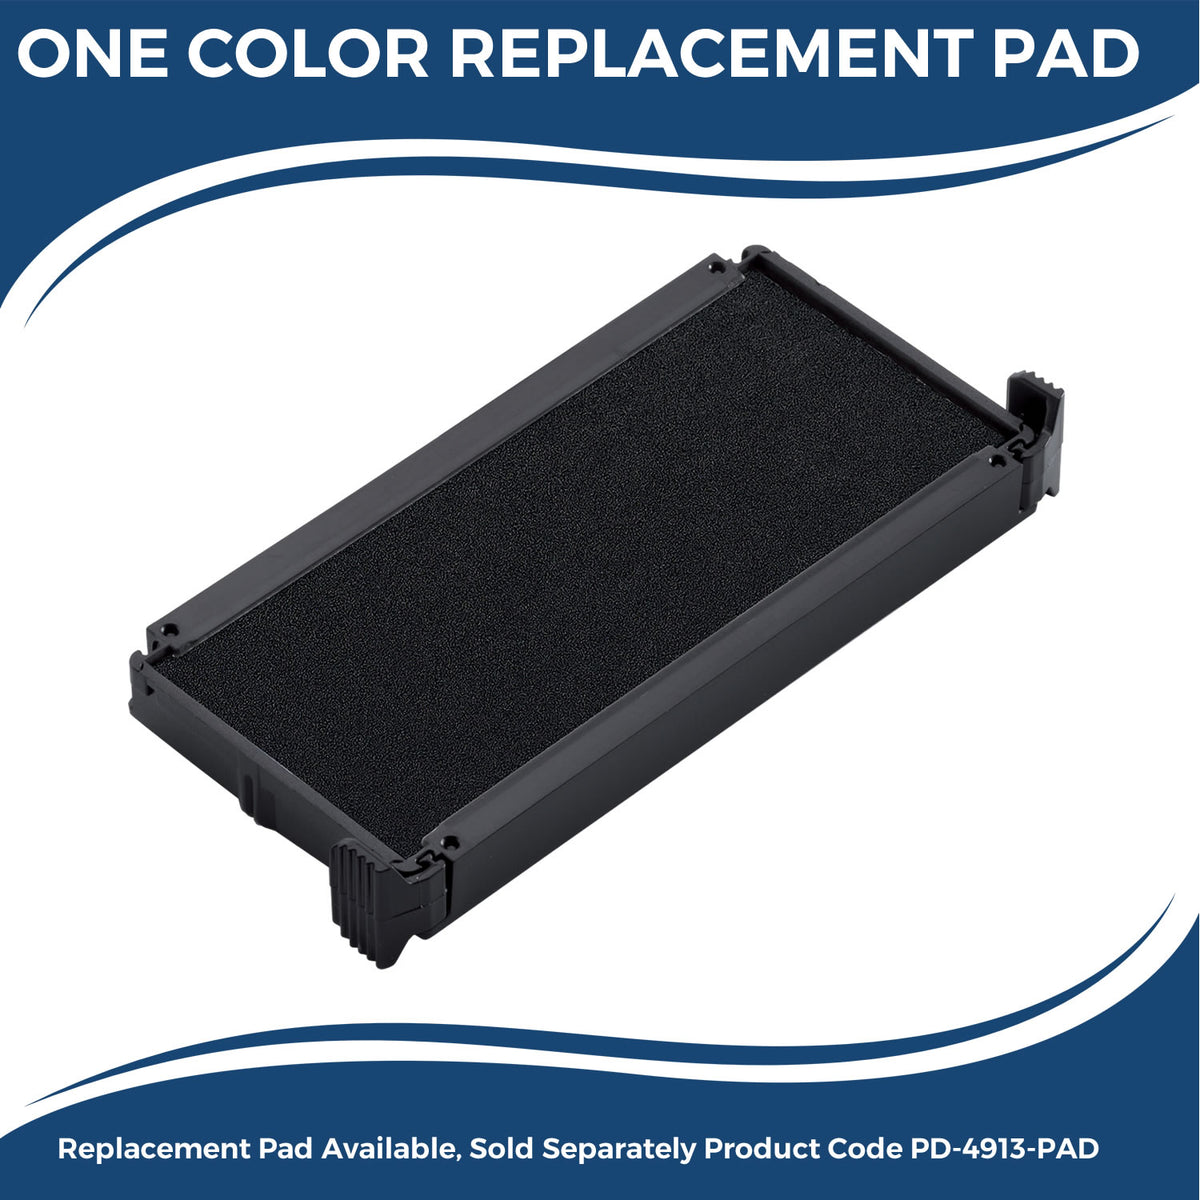 Large Self Inking Credit Report Stamp 4570S Large Replacment Pad